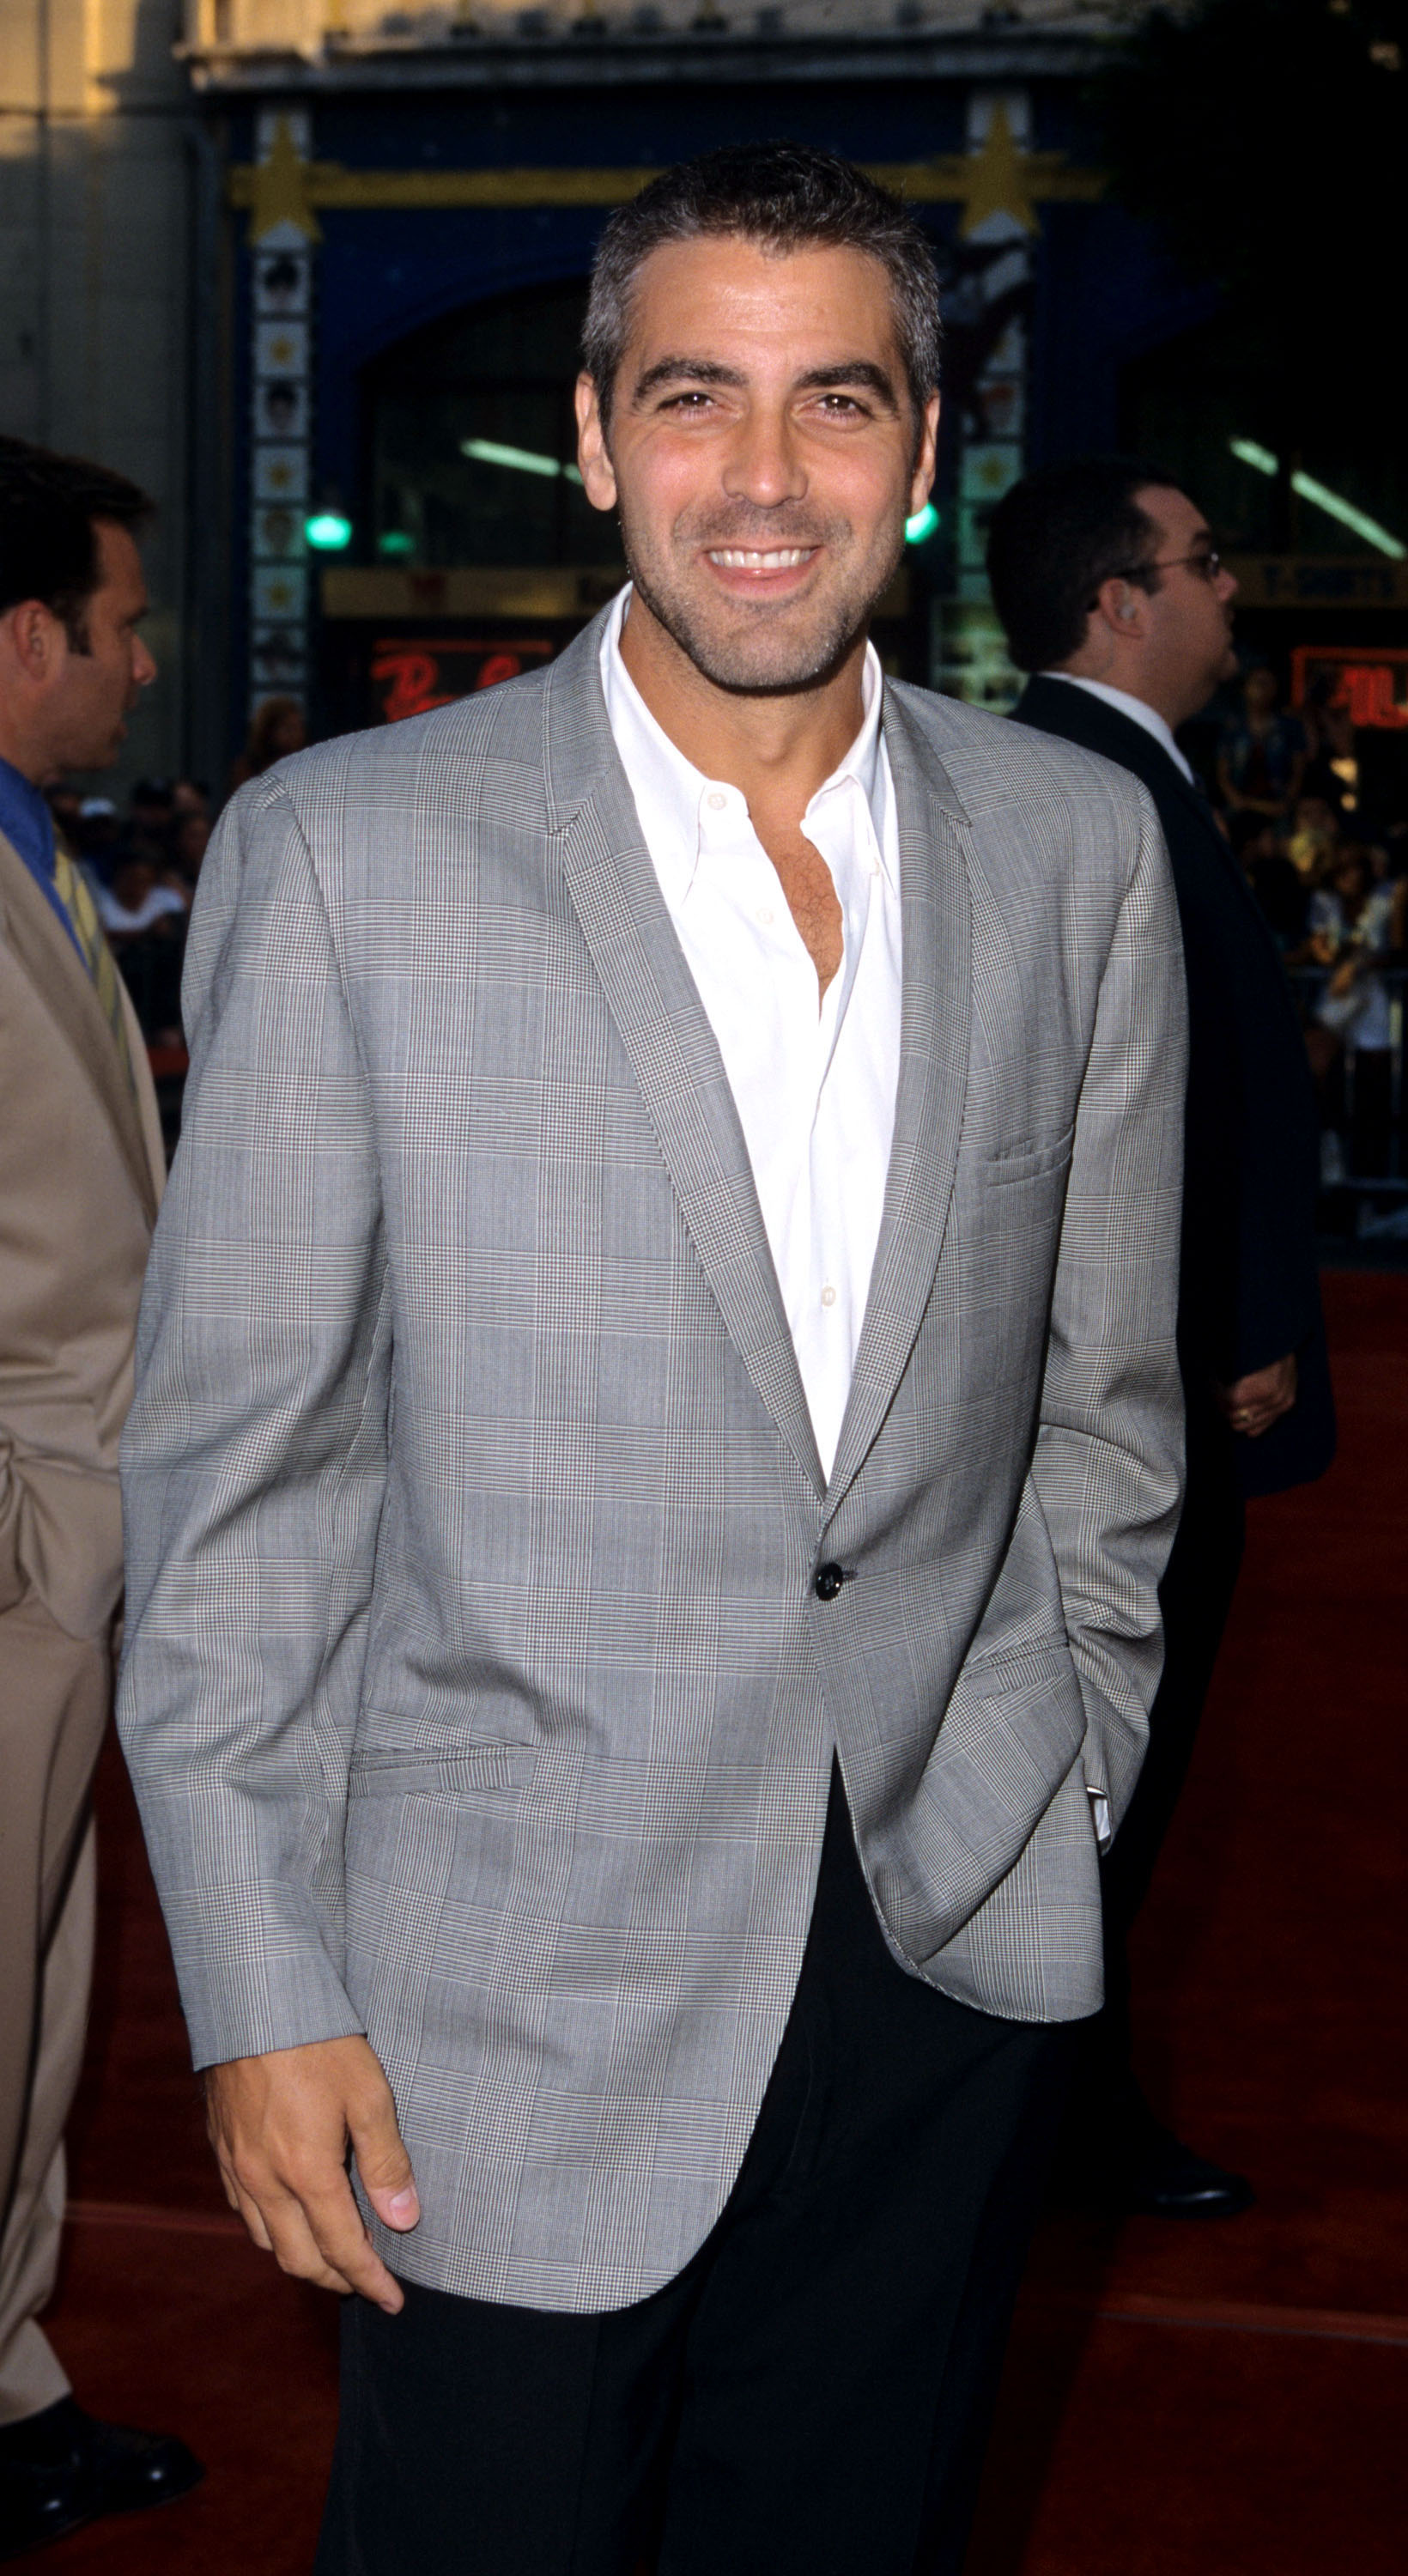 George Clooney at the premiere of "Lethal Weapon 4" in Hollywood, California in 1998 | Source: Getty Images